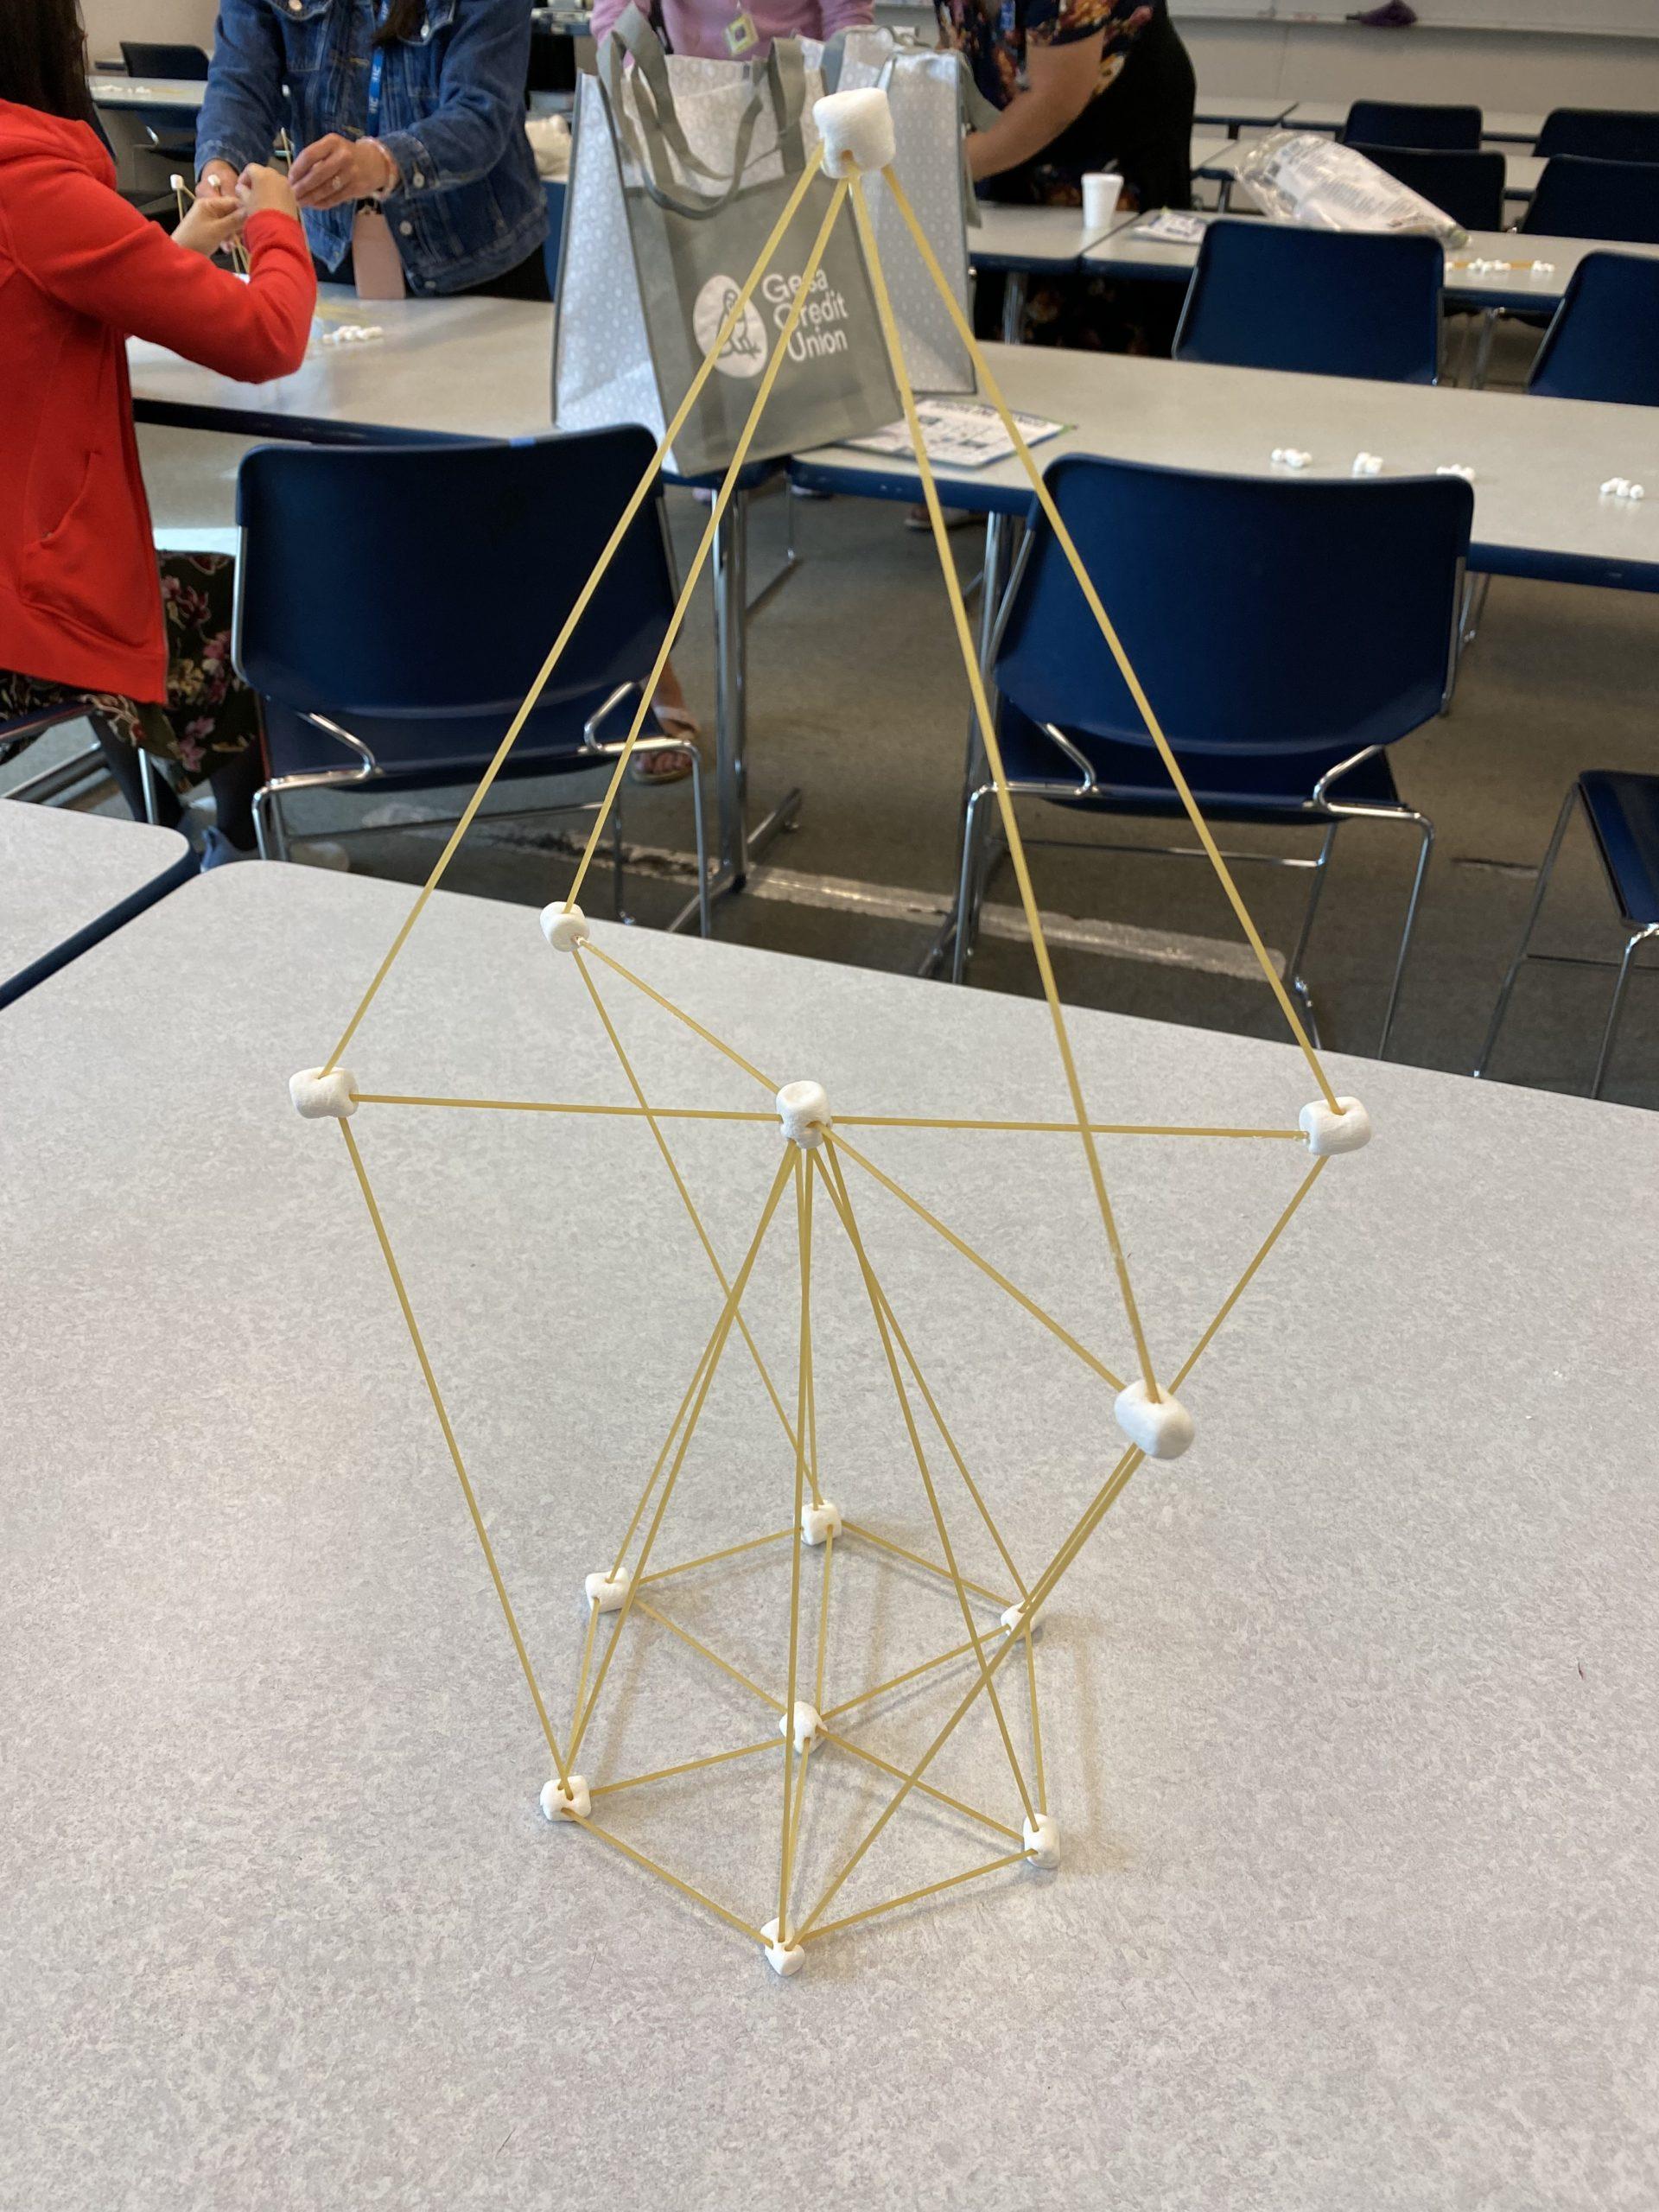 A vaugely pyramidal structure built of dry spaghetti and marshmallows, approximately 20 inches tall.